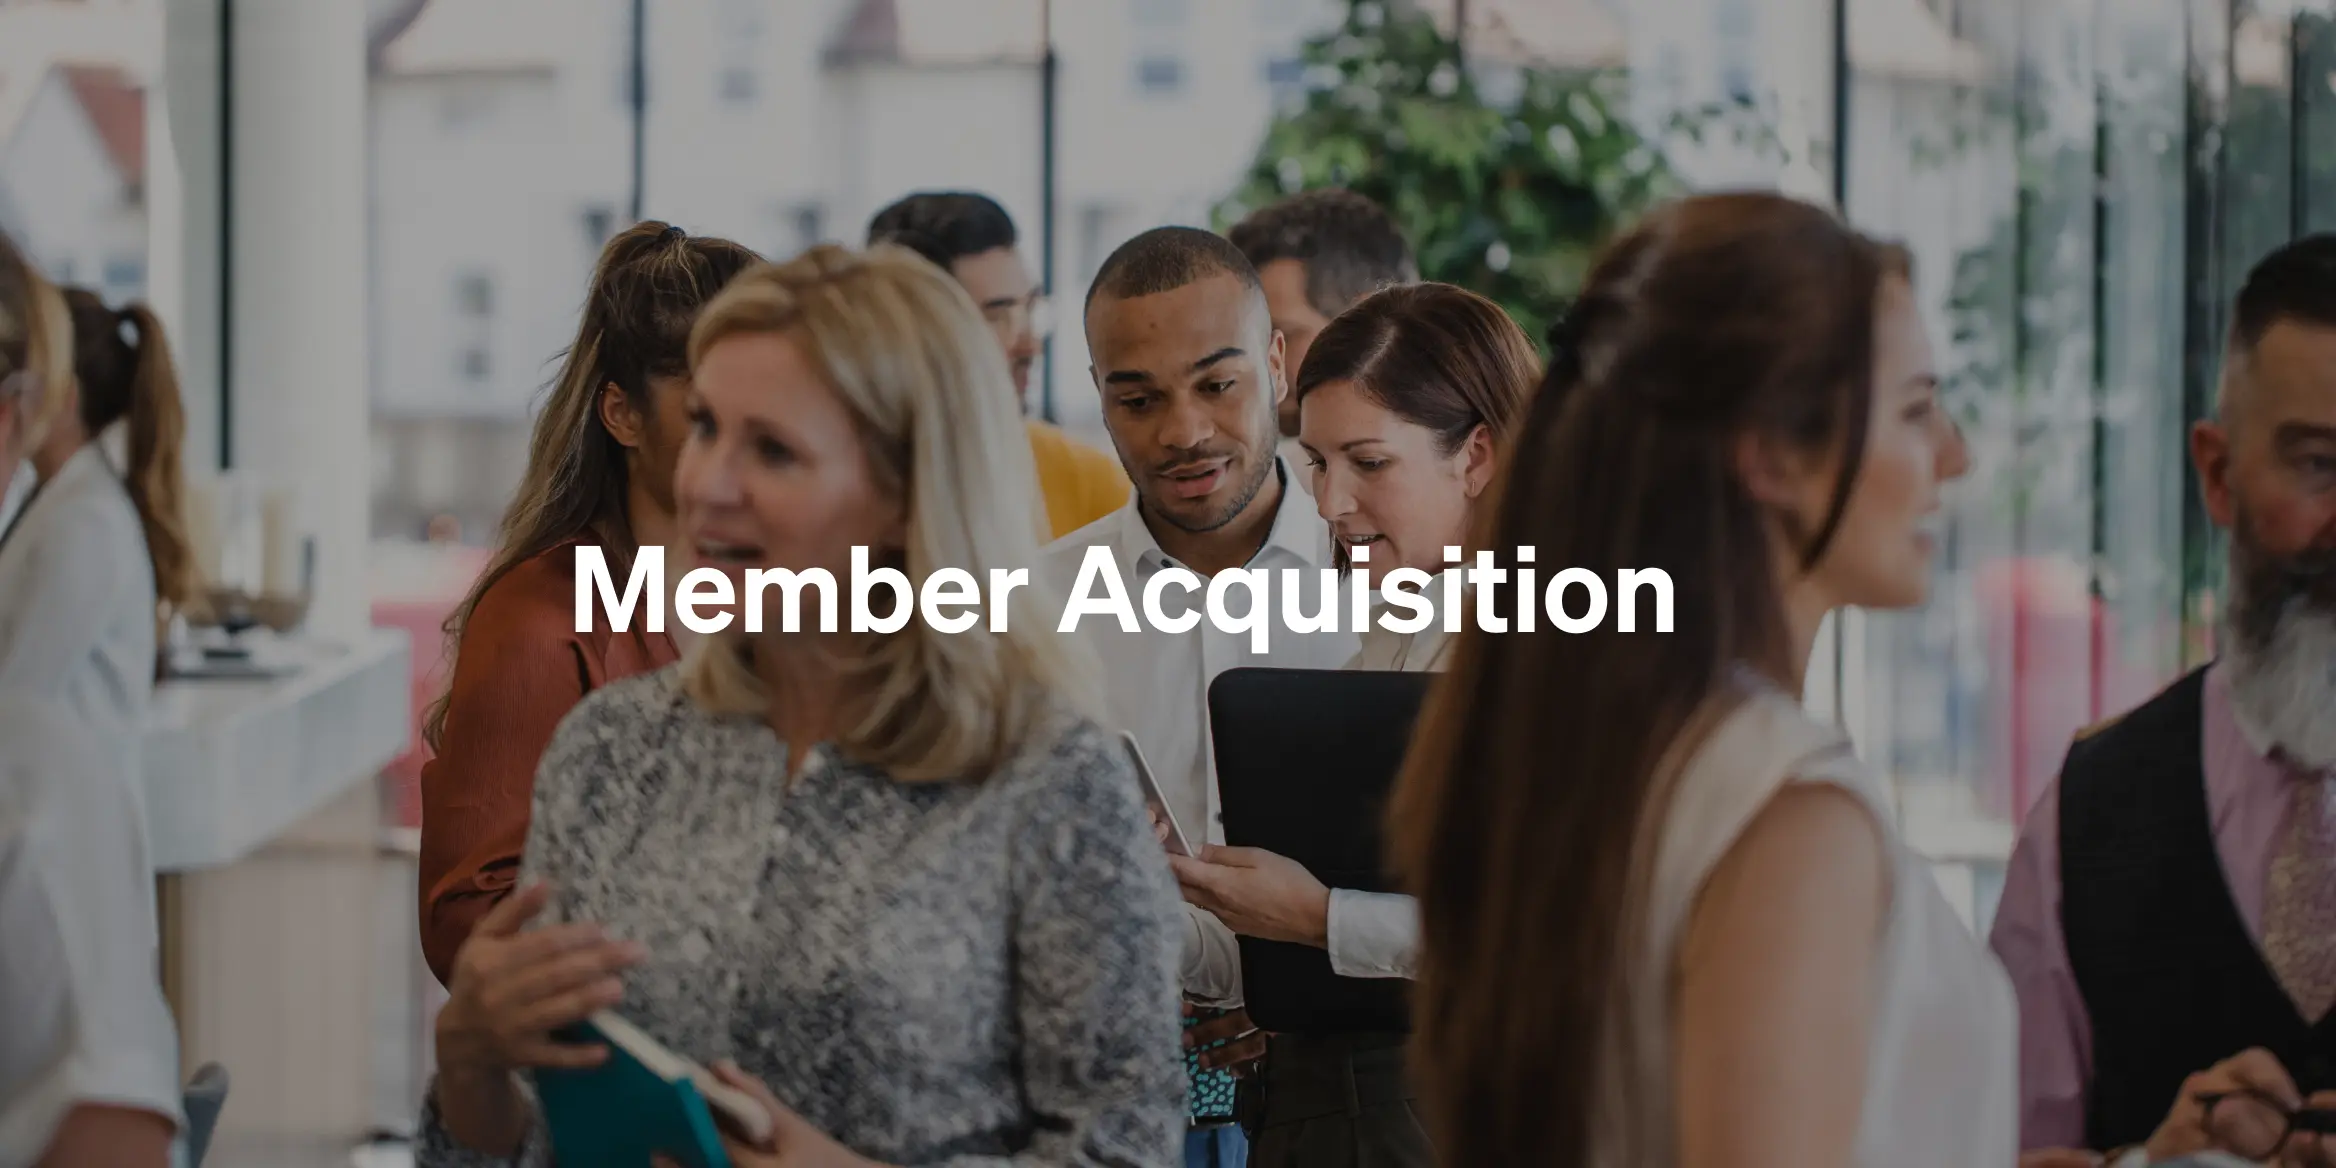 5 Coworking Leaders on Exactly How to Acquire Your First Members